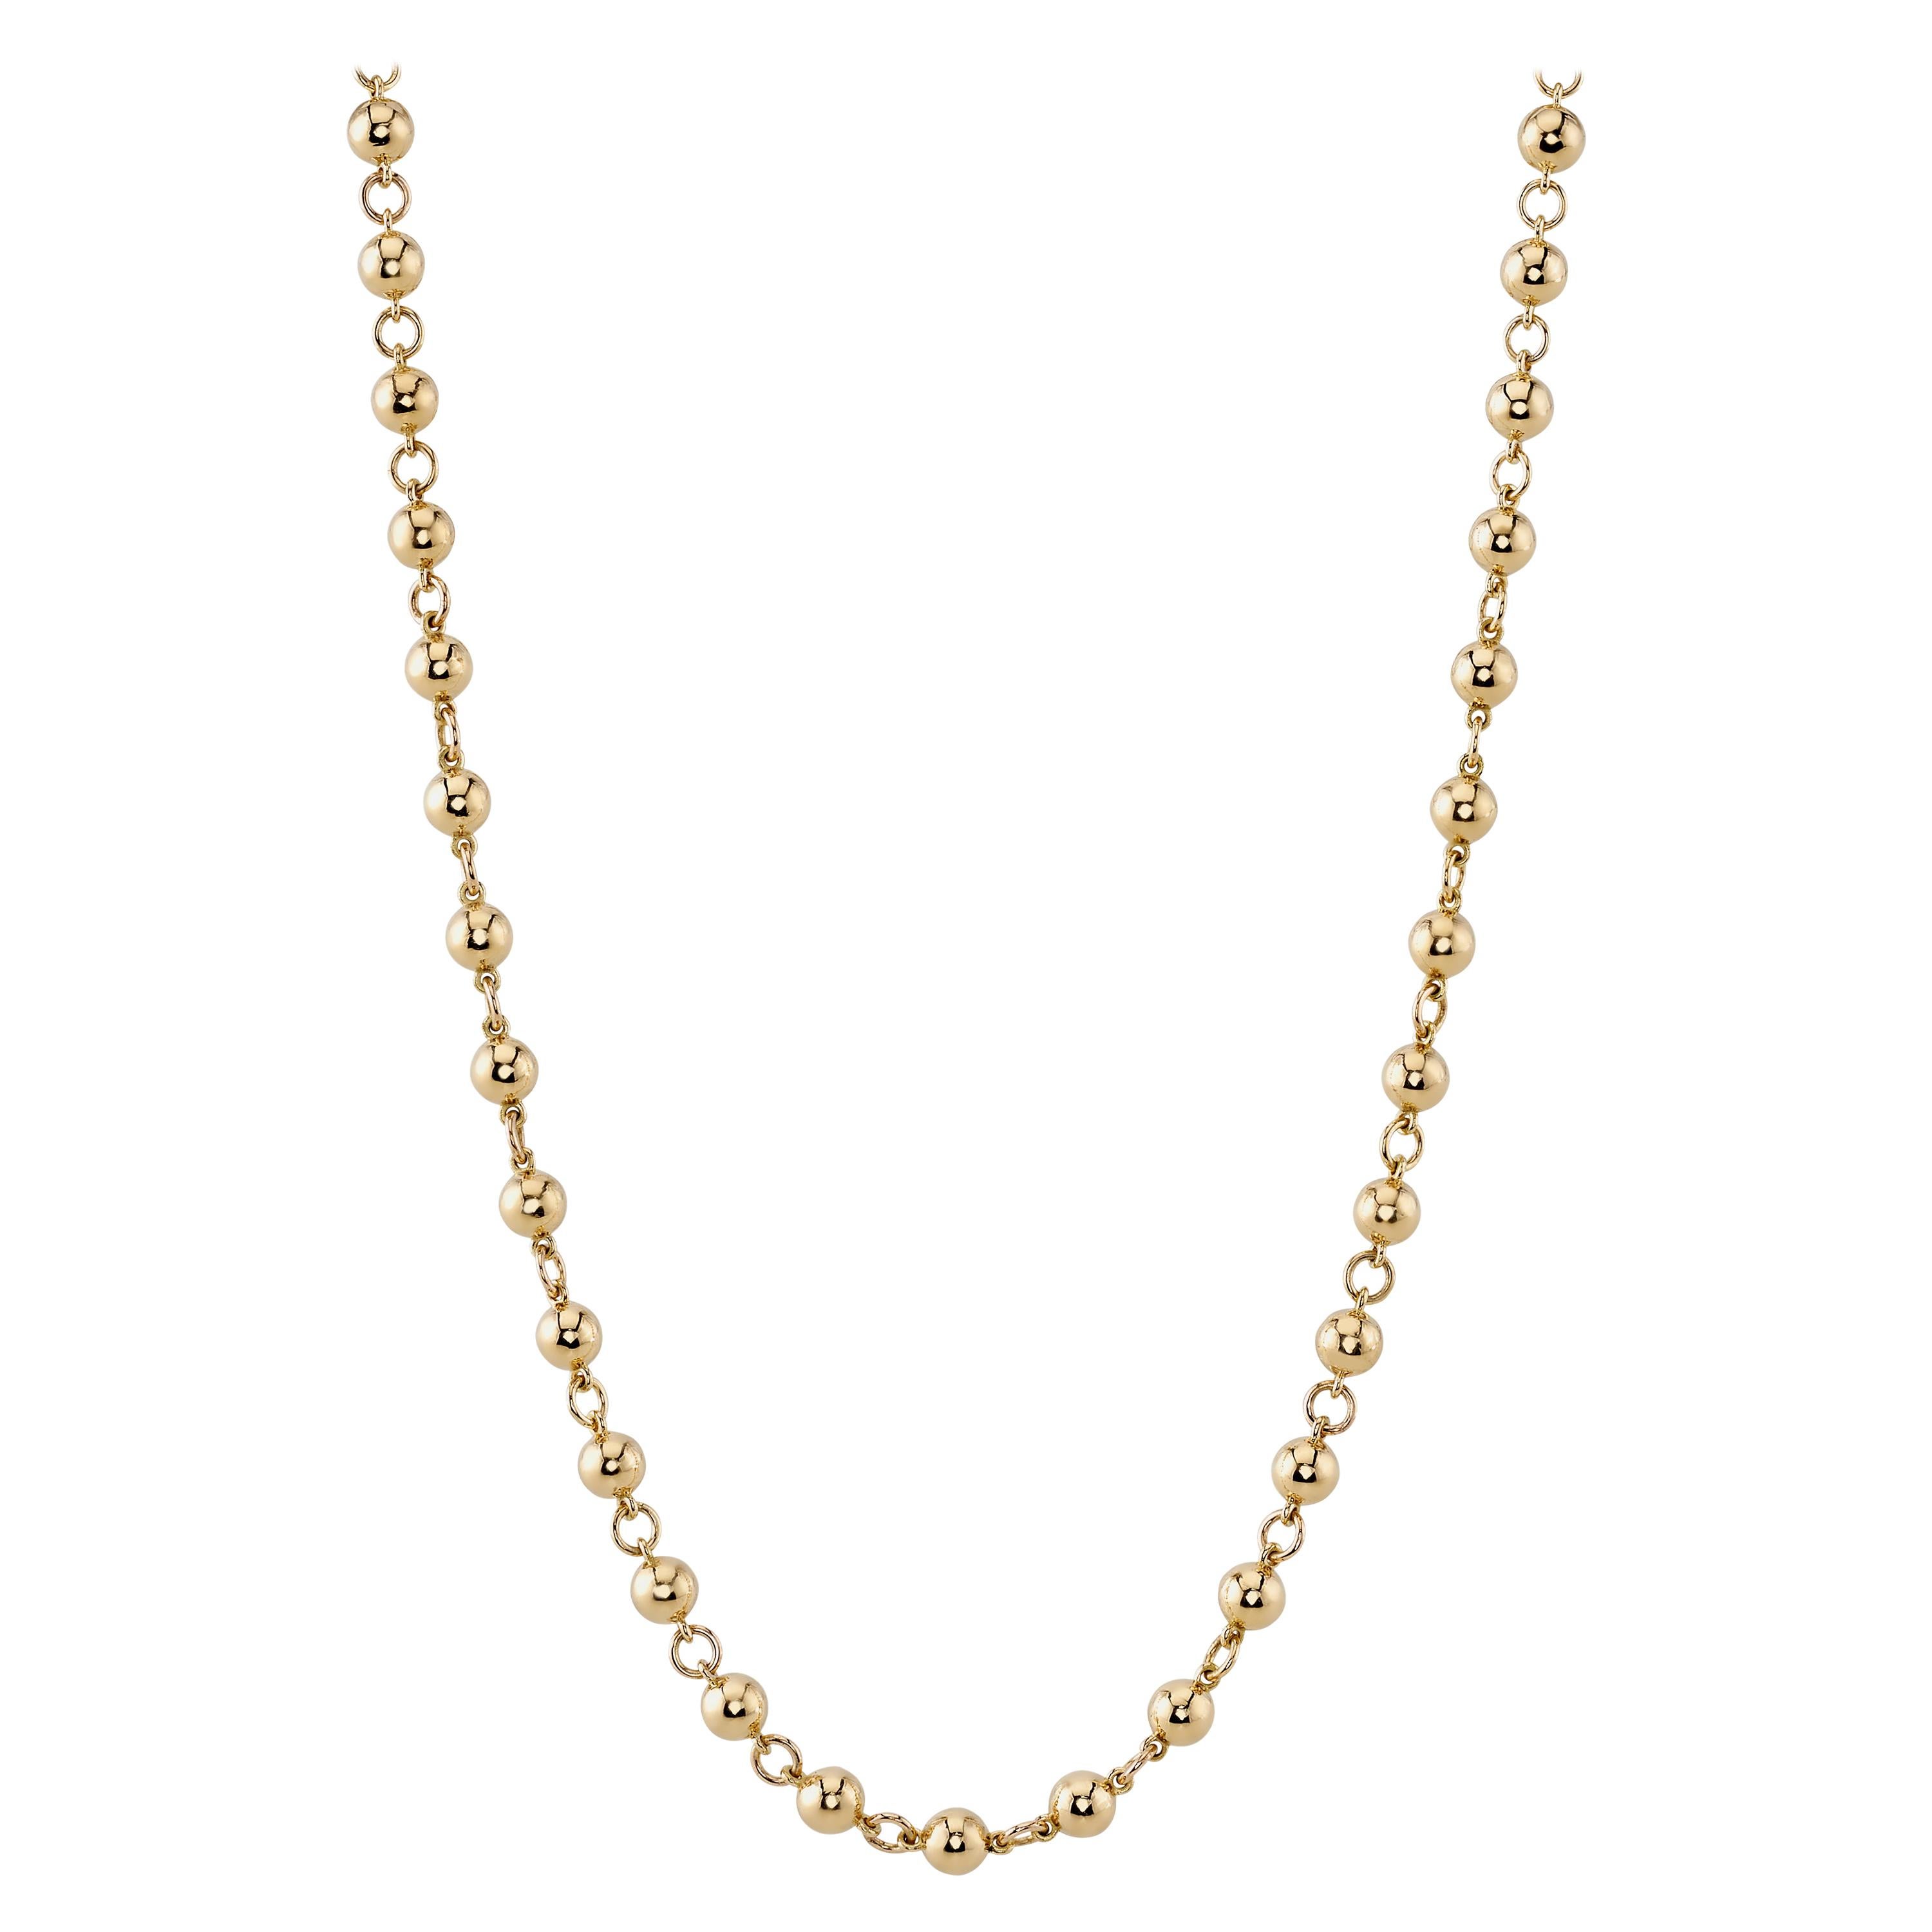 Handcrafted Mirella Necklace in 18K Yellow Gold by Single Stone For Sale